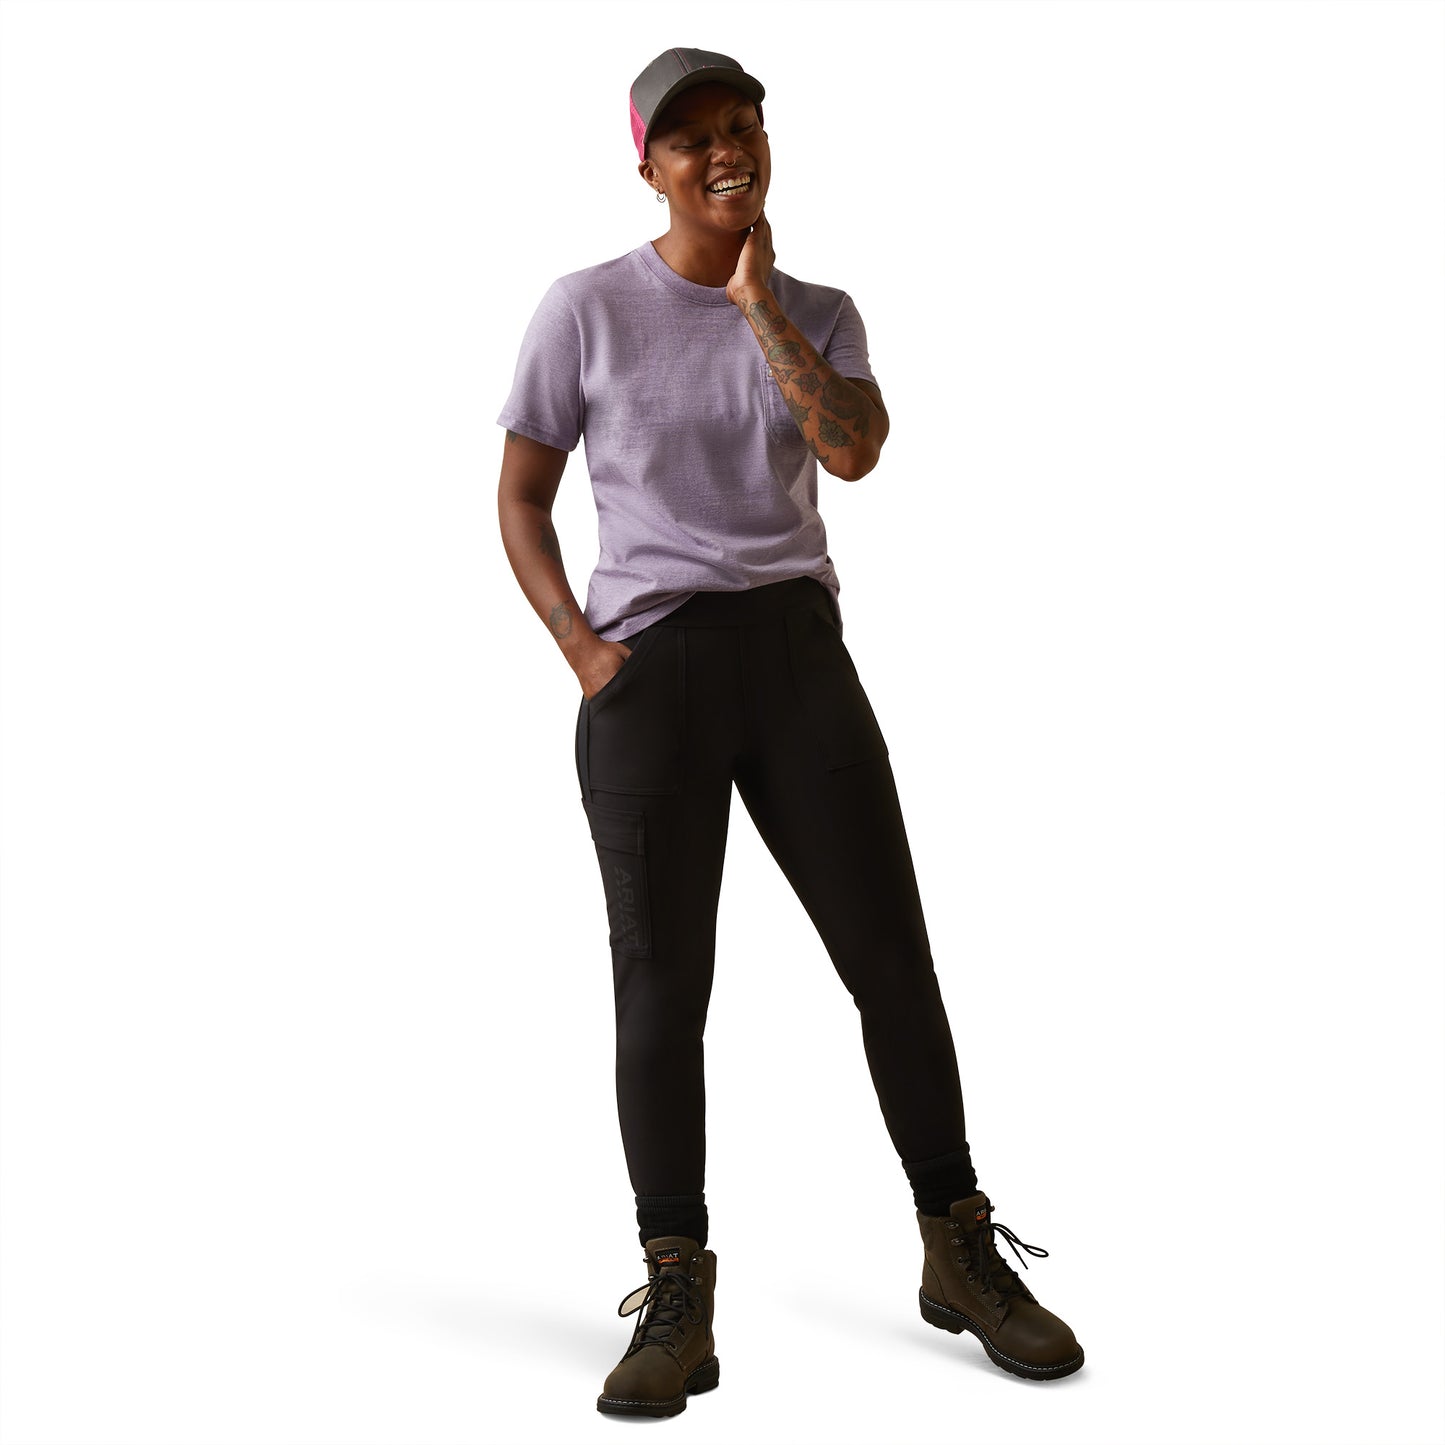 Load image into Gallery viewer, Ariat® Ladies Rebar Cotton Strong™ Lavendar Heather T-Shirt 10043561
